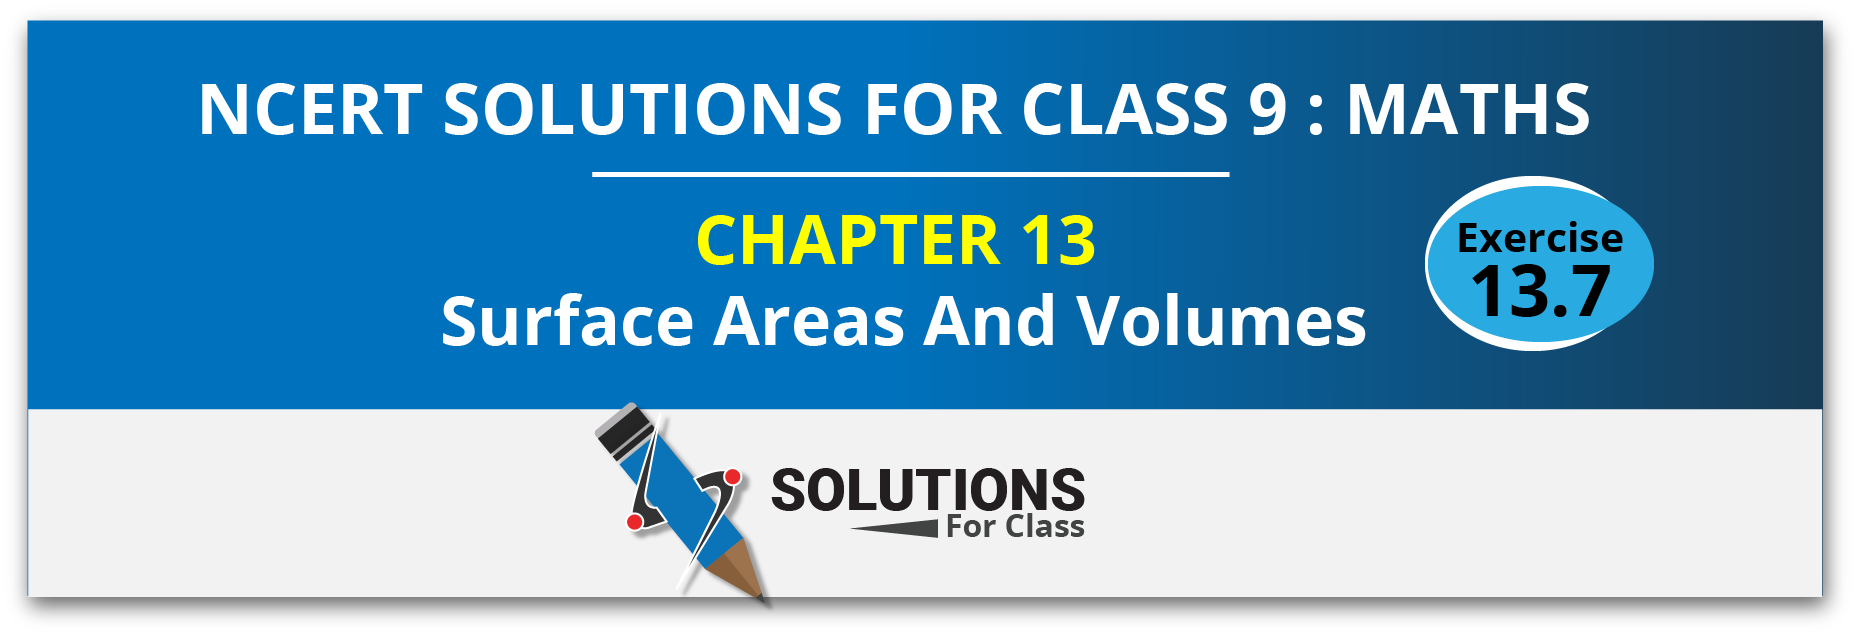 NCERT Solutions for Class 9 Maths Chapter 13 Surface Areas and Volumes Ex 13.7